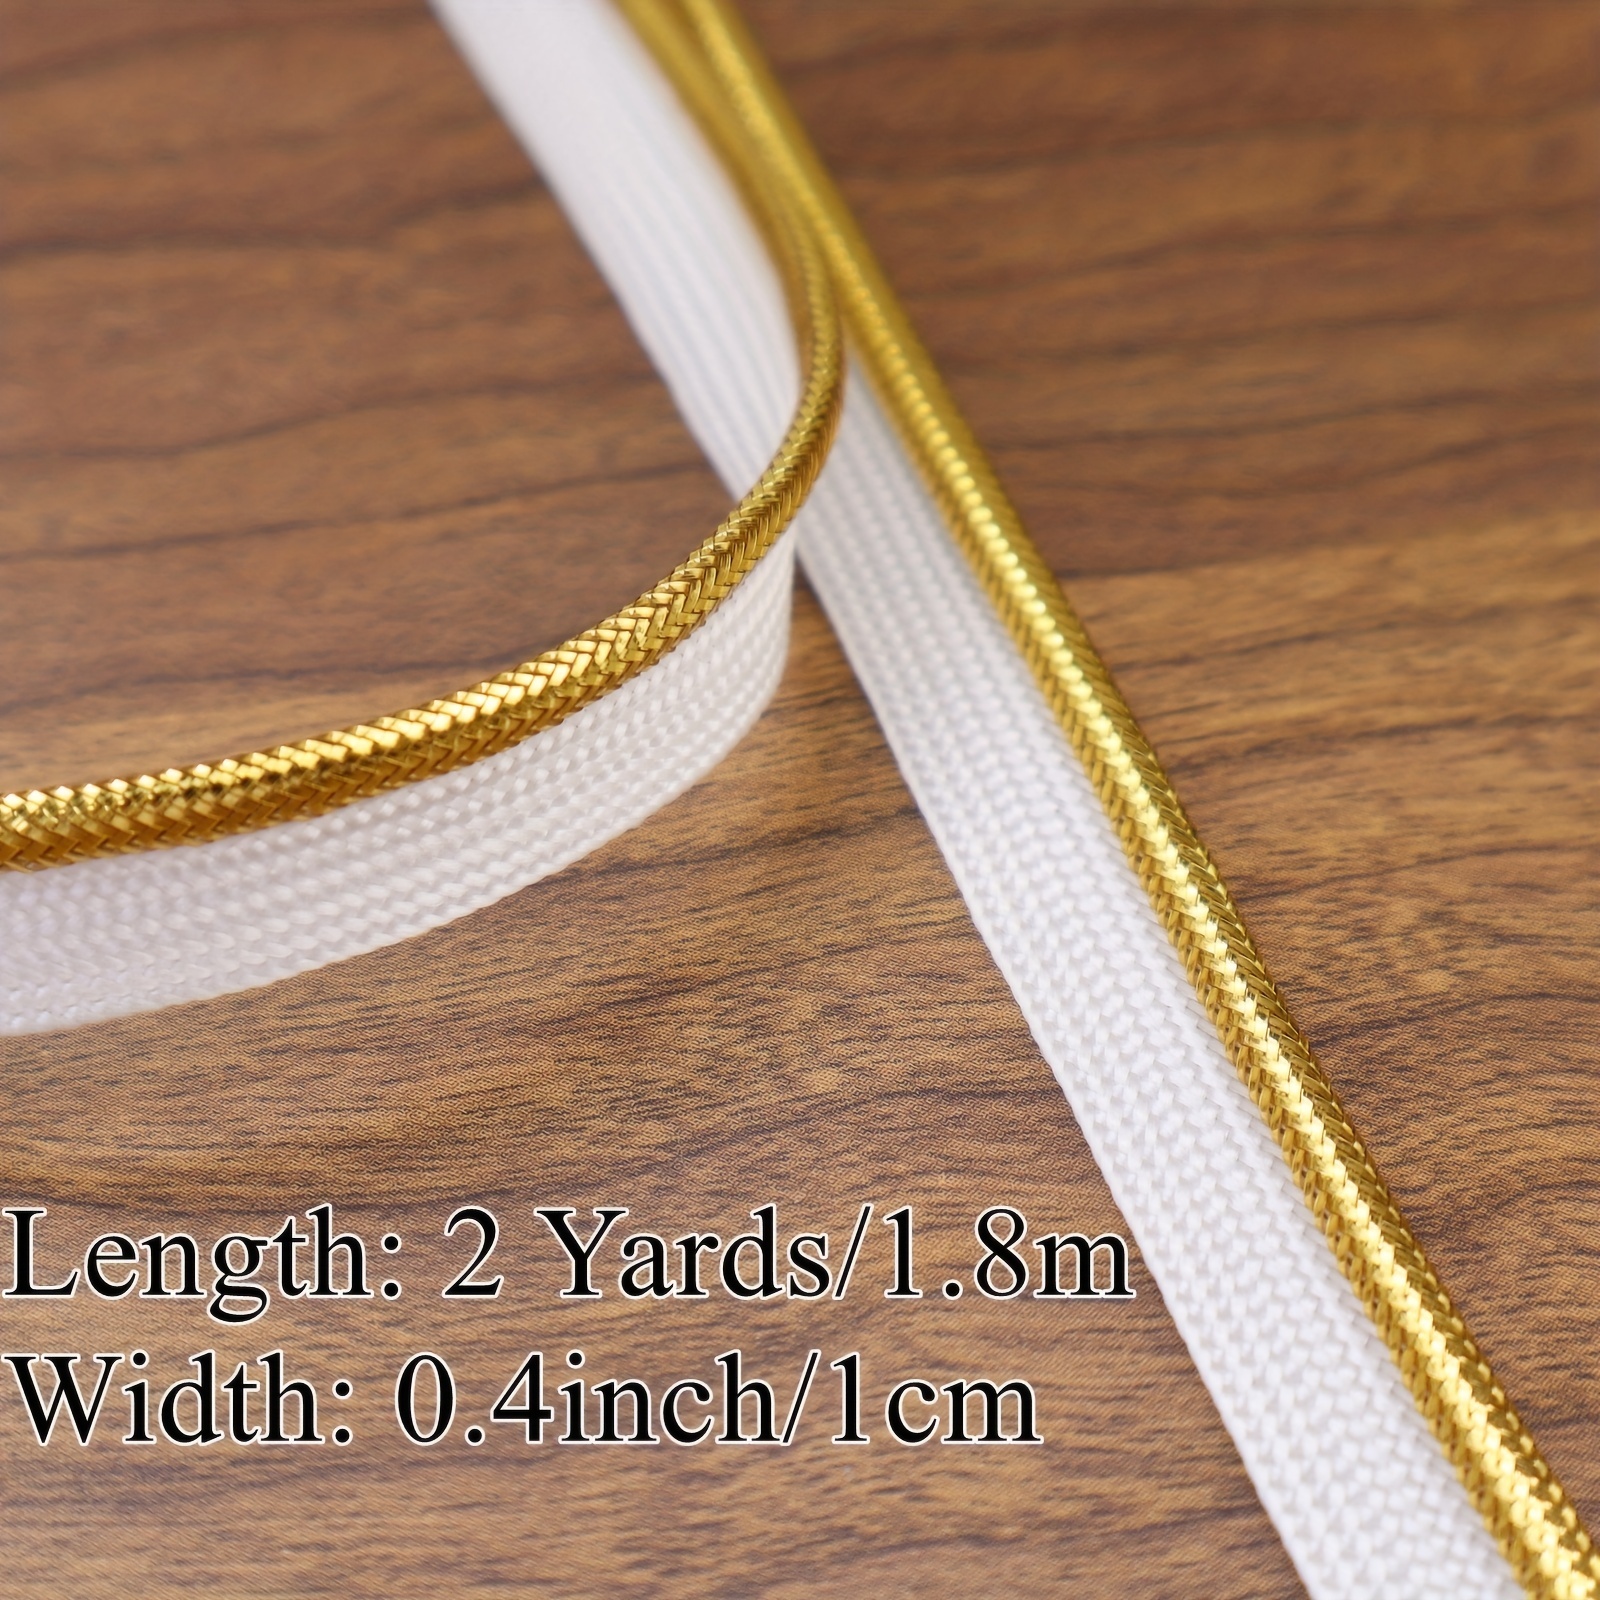 Golden Piping Trim with Metallic Lip Welting 0.4inch/1cm Bias Tape Trim for  Sewing Home Decor Upholstery 5 Yards